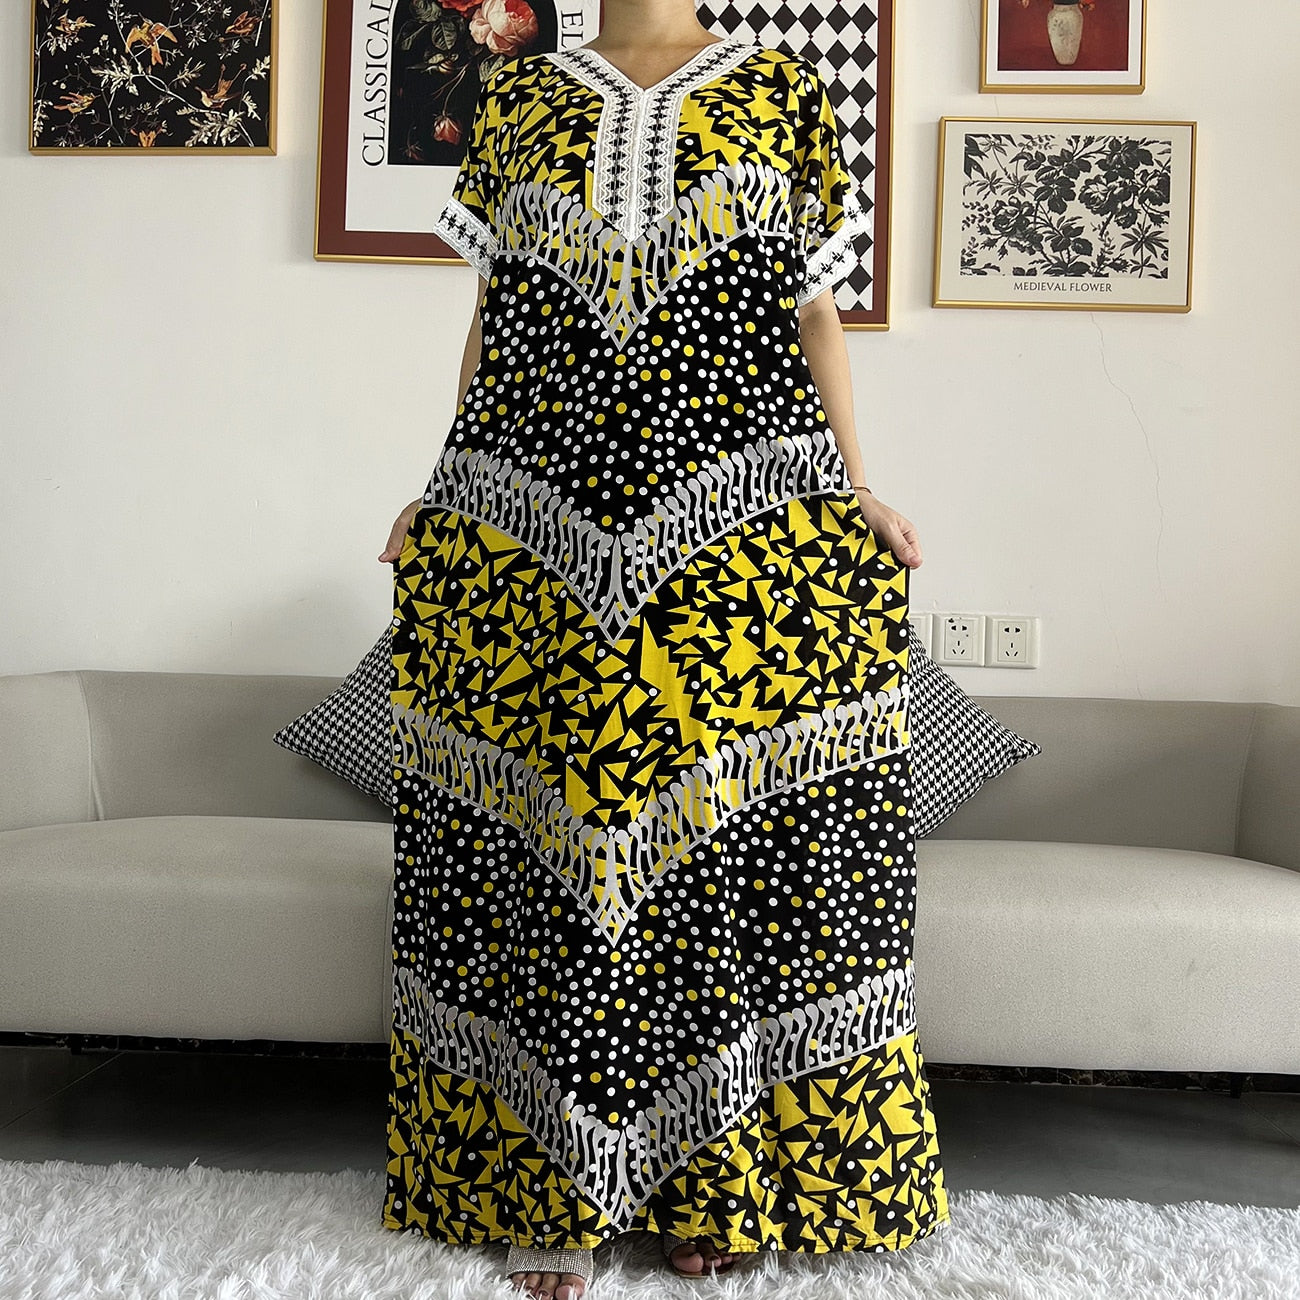 Ethnic Elegance: Vibrant Multicolor Floral Party Robe with Headscarf - The Perfect African Inspired Maxi Dress - Flexi Africa - Flexi Africa offers Free Delivery Worldwide - Vibrant African traditional clothing showcasing bold prints and intricate designs